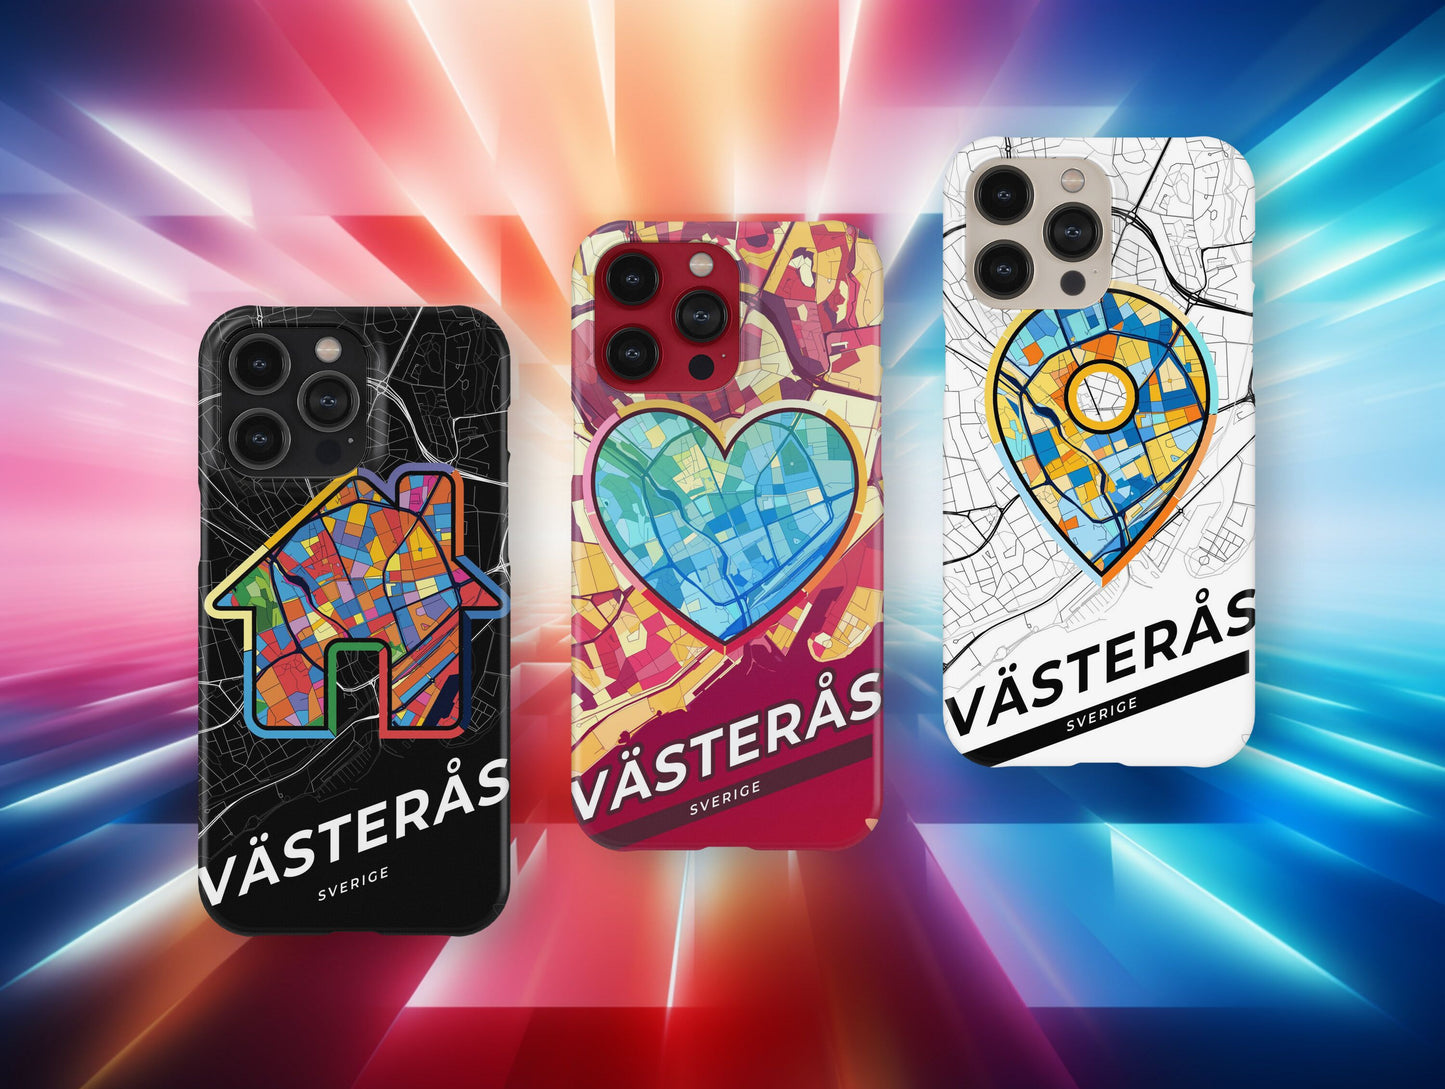 Västerås Sweden slim phone case with colorful icon